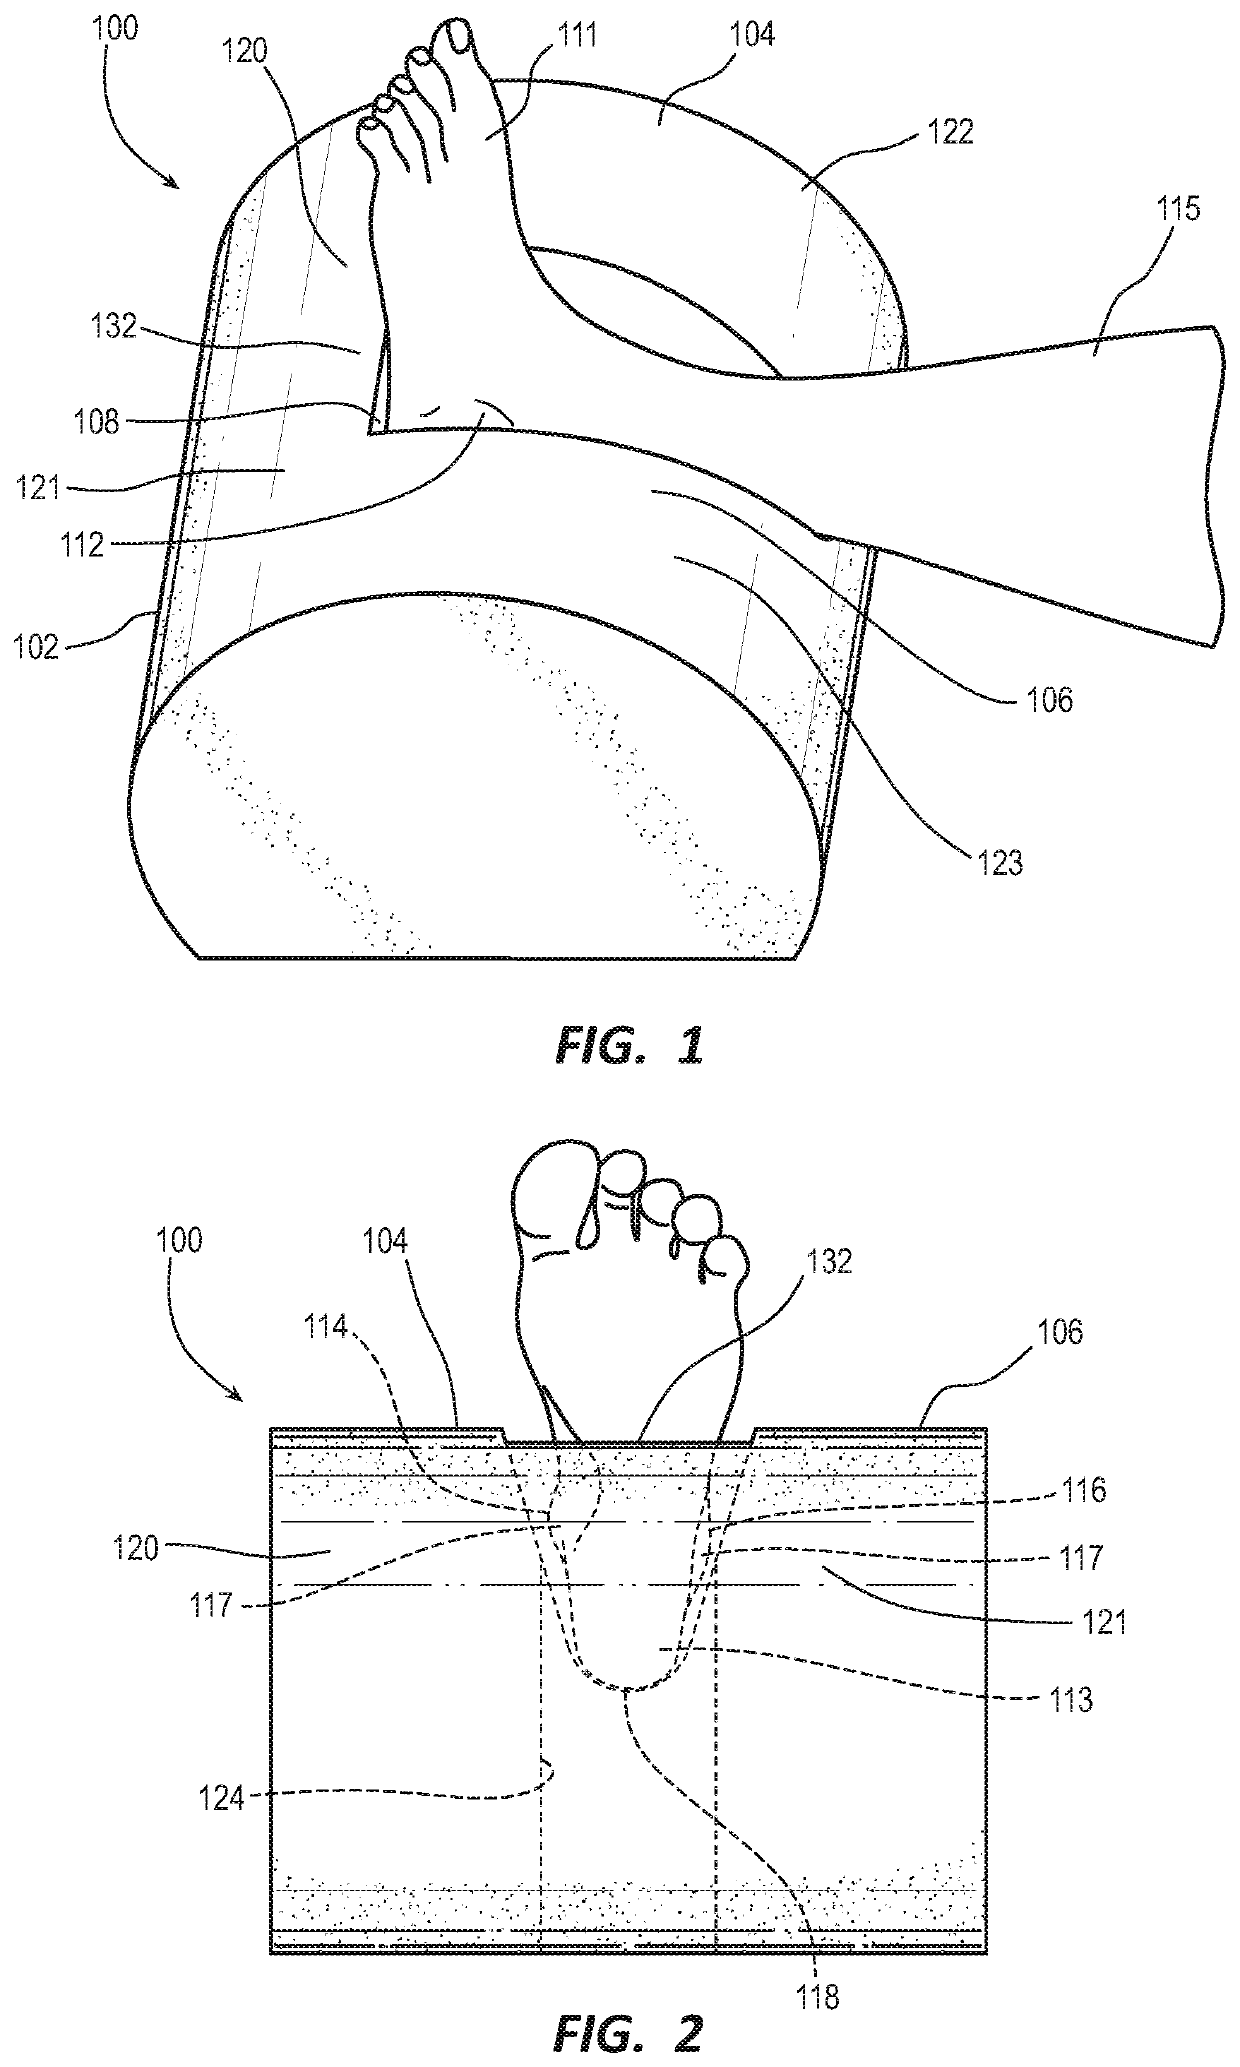 Orthopedic device for stabilizing the lower leg and enabling knee motion therapy